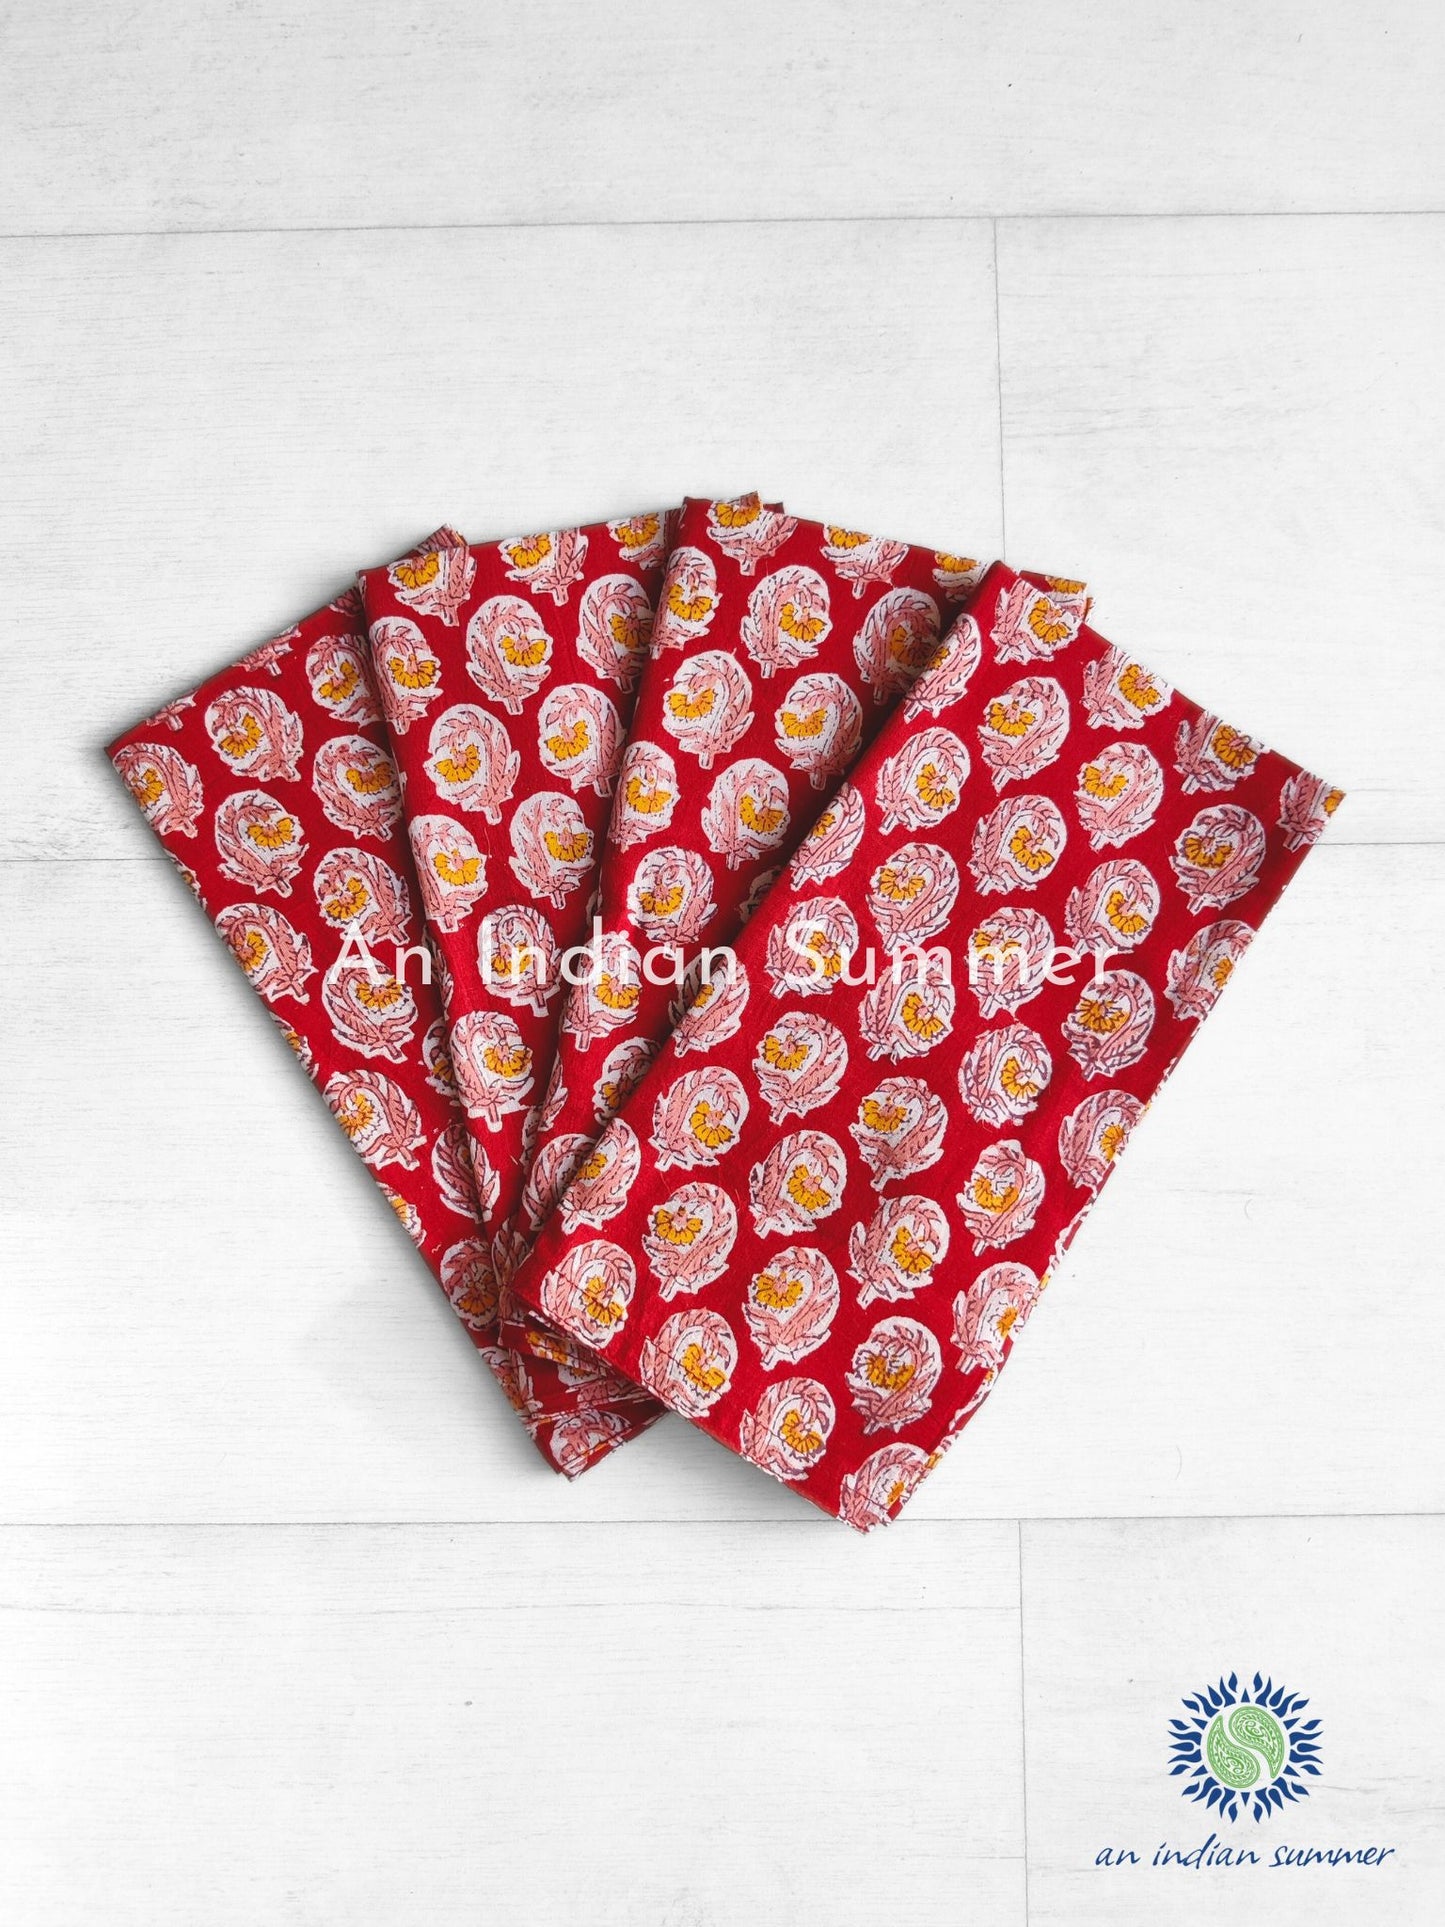 Cotton Napkins - Available in Various Designs